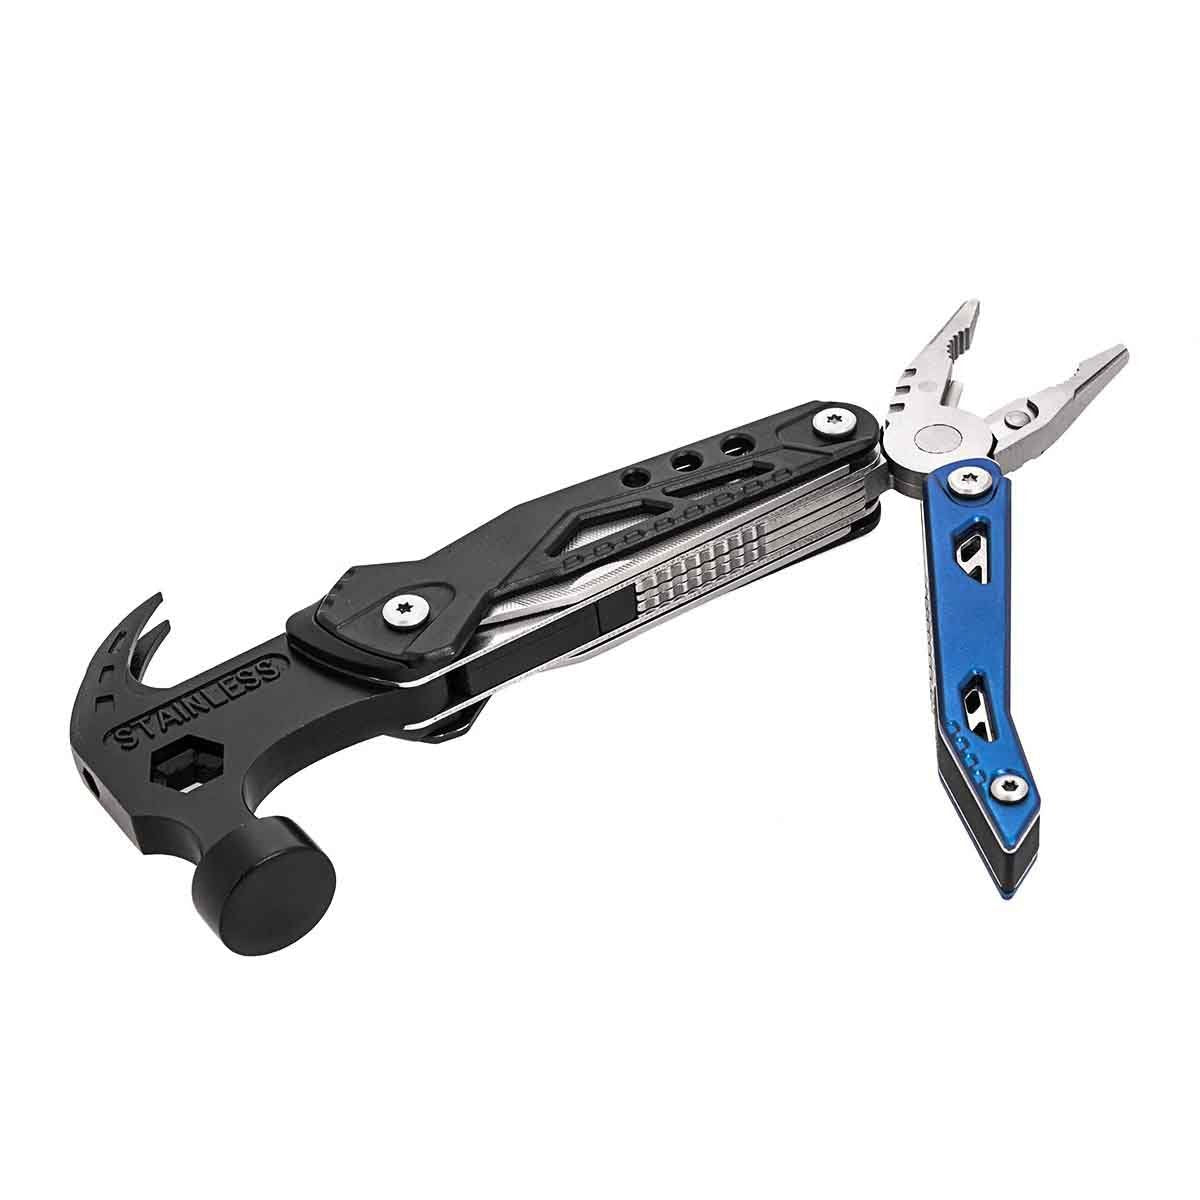  Portable 7-in-1 Hammer Multitool fore Home and Outdoor